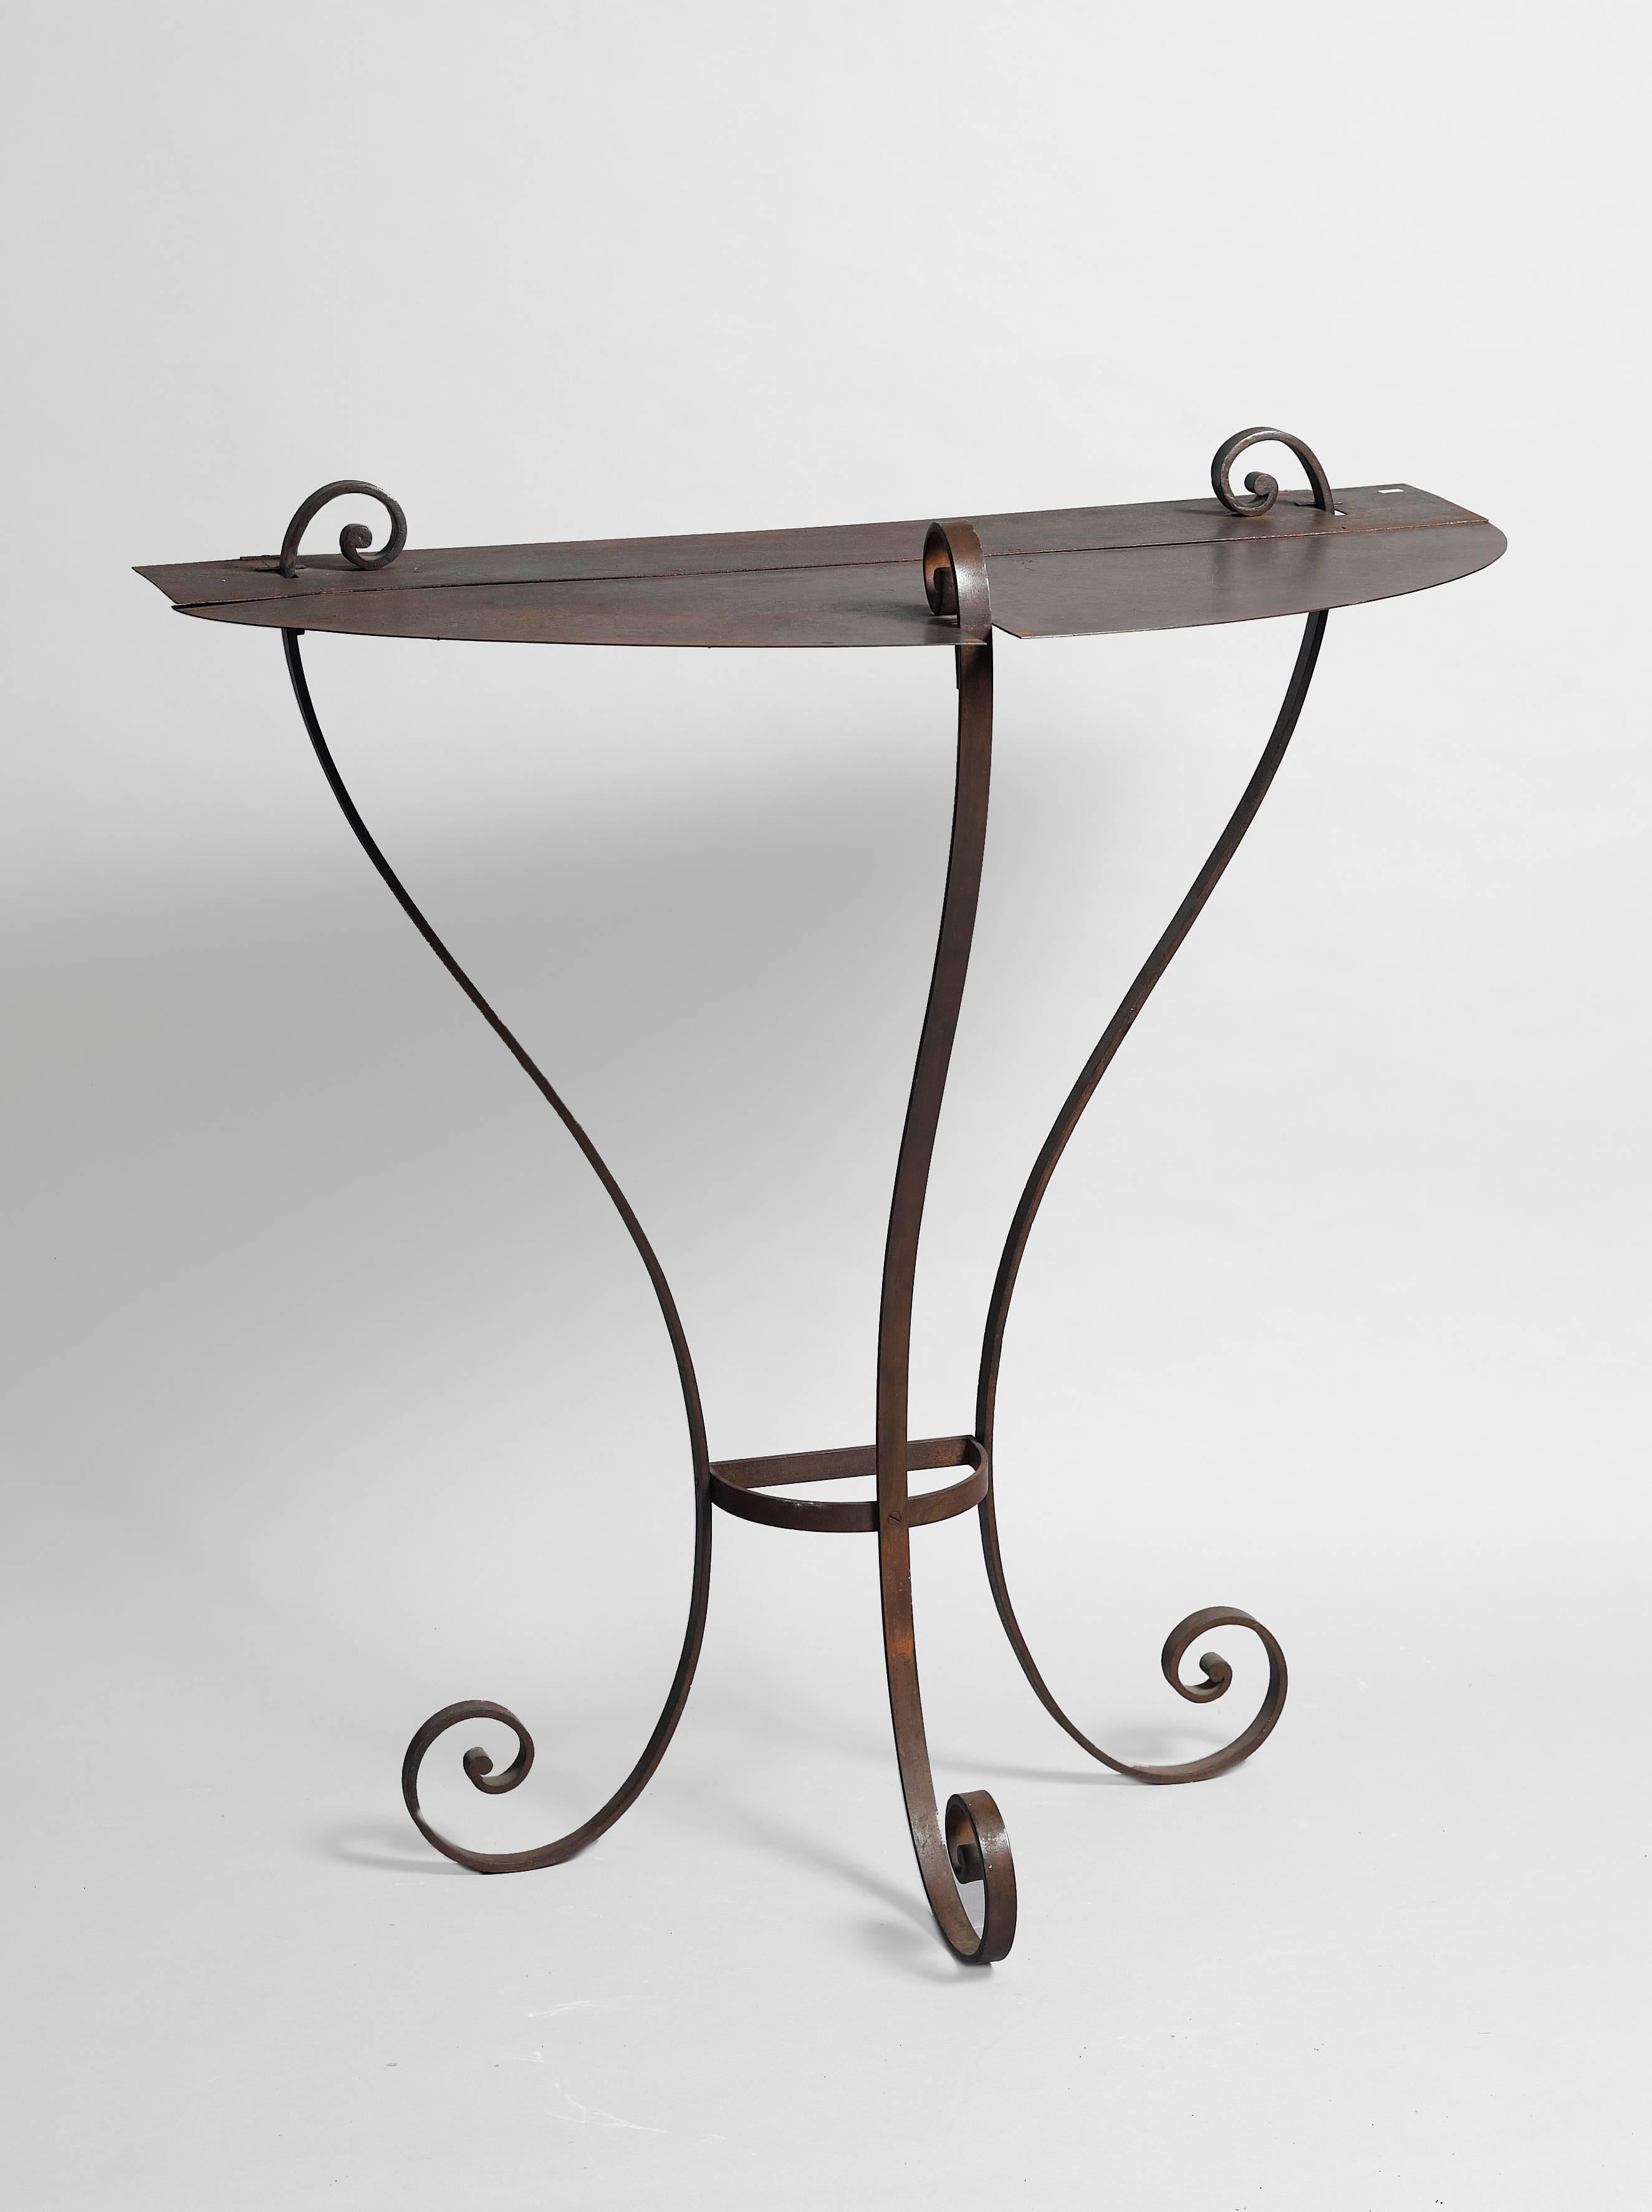 Important and rare metal conservatory console in very beautiful old patina  - 1/2 moon tray resting on 3 curved legs with windings - France 19th century
Dimensions: w.106 X d.60.5 X h.110 cm